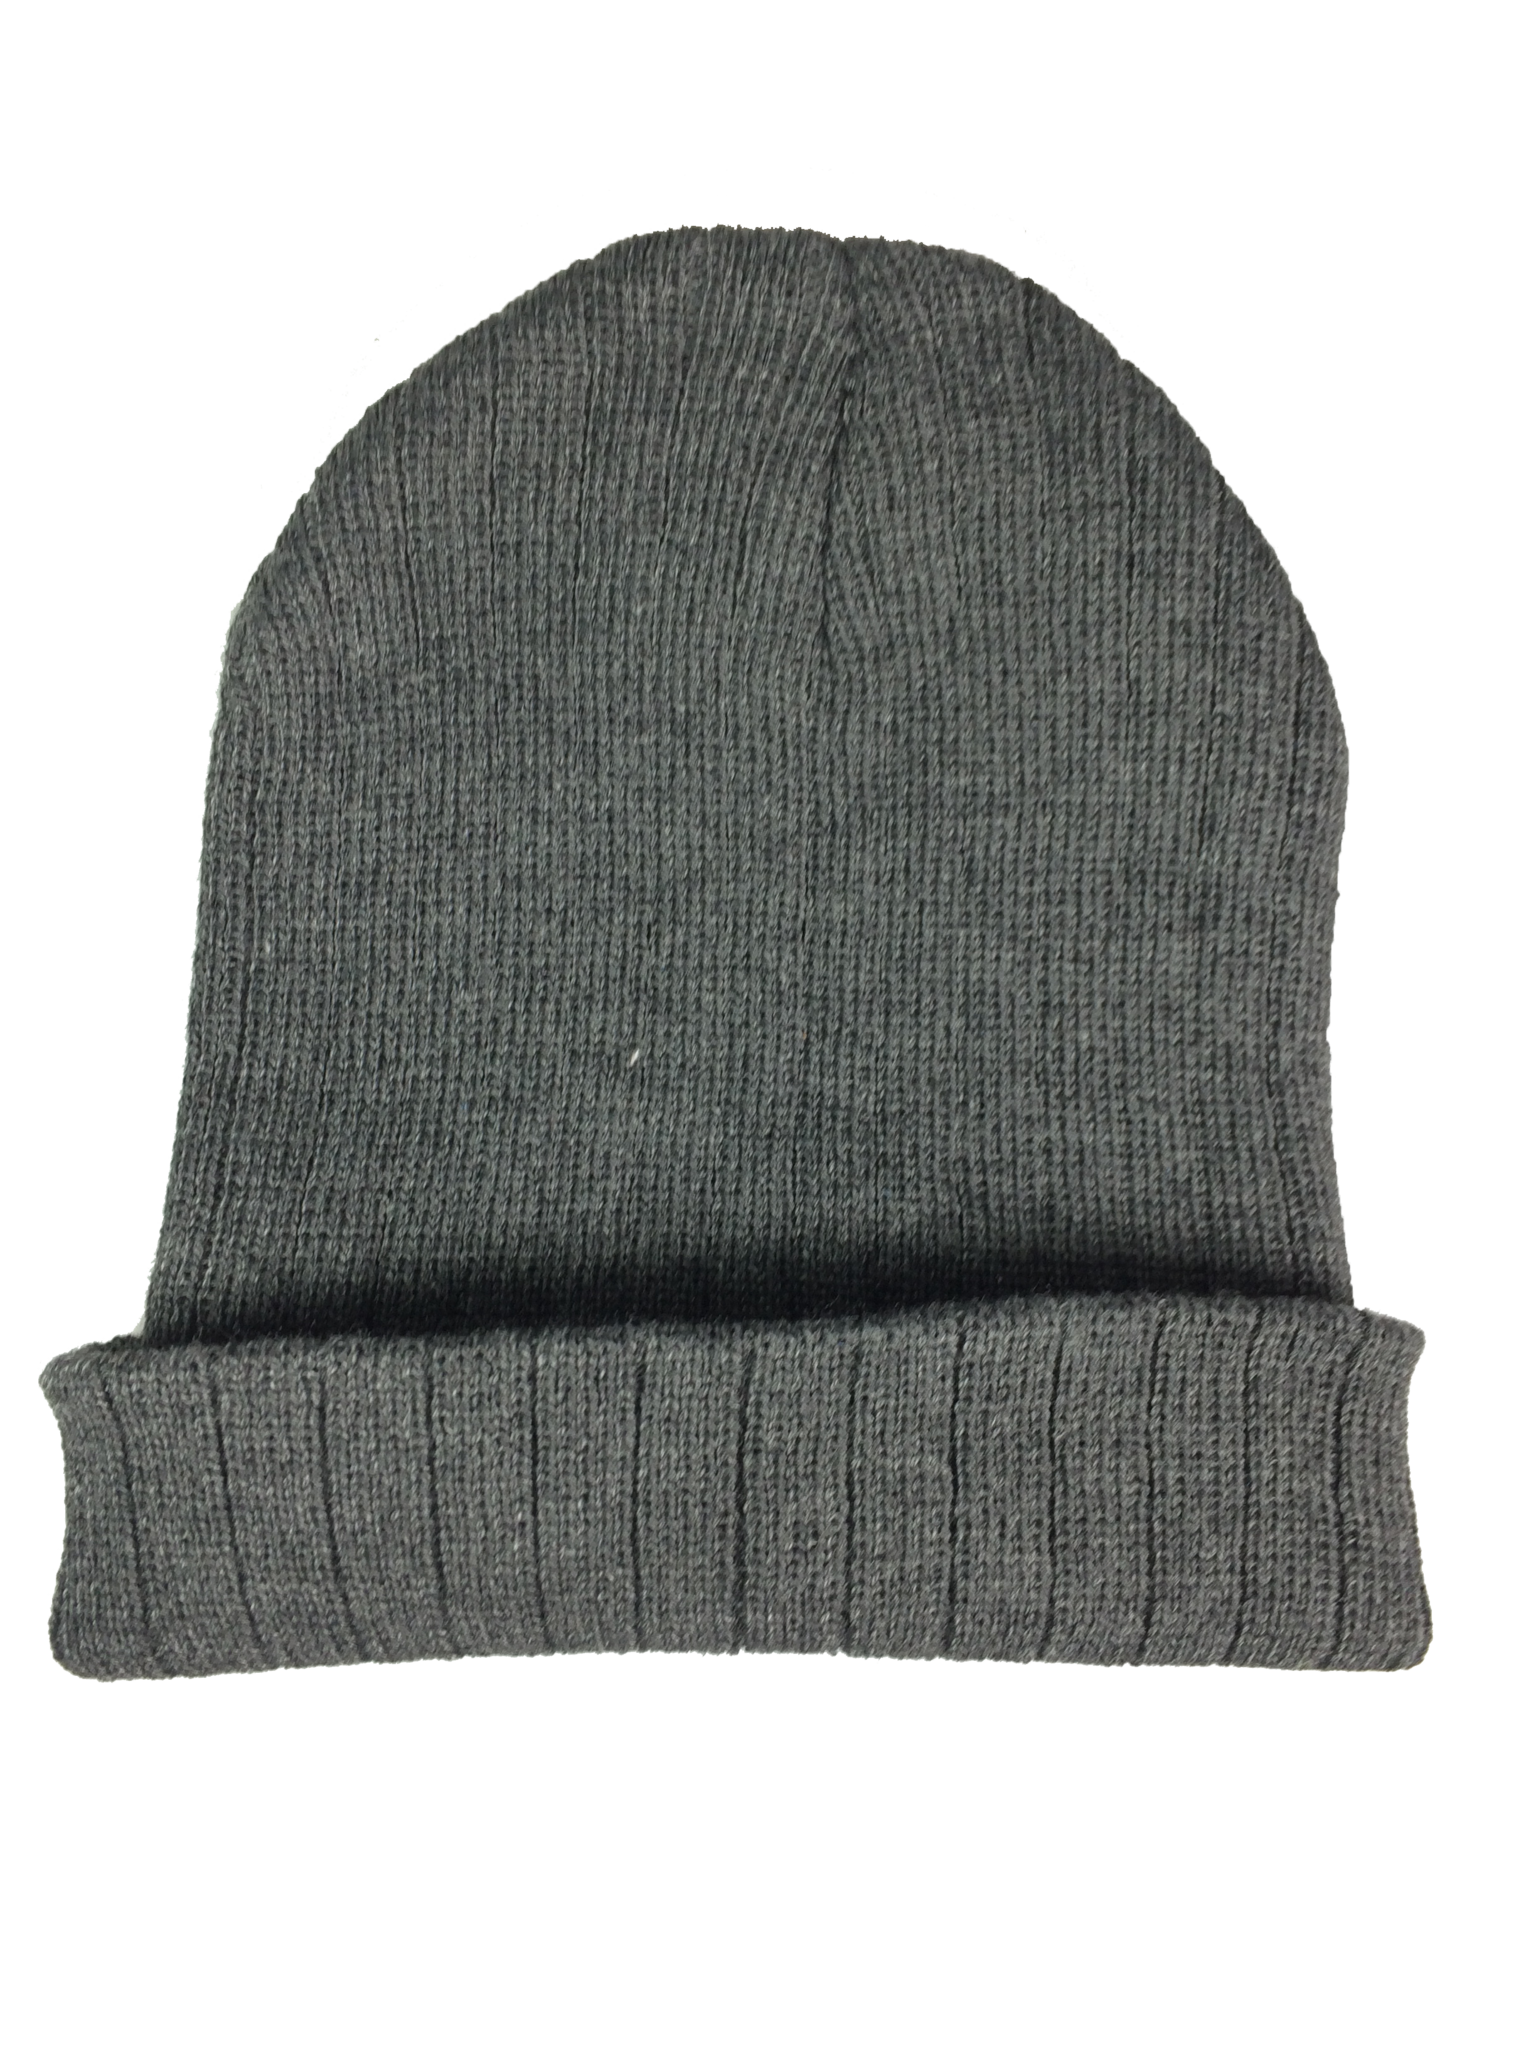 Woolen Pic Hat Winter HD Image Free PNG Image